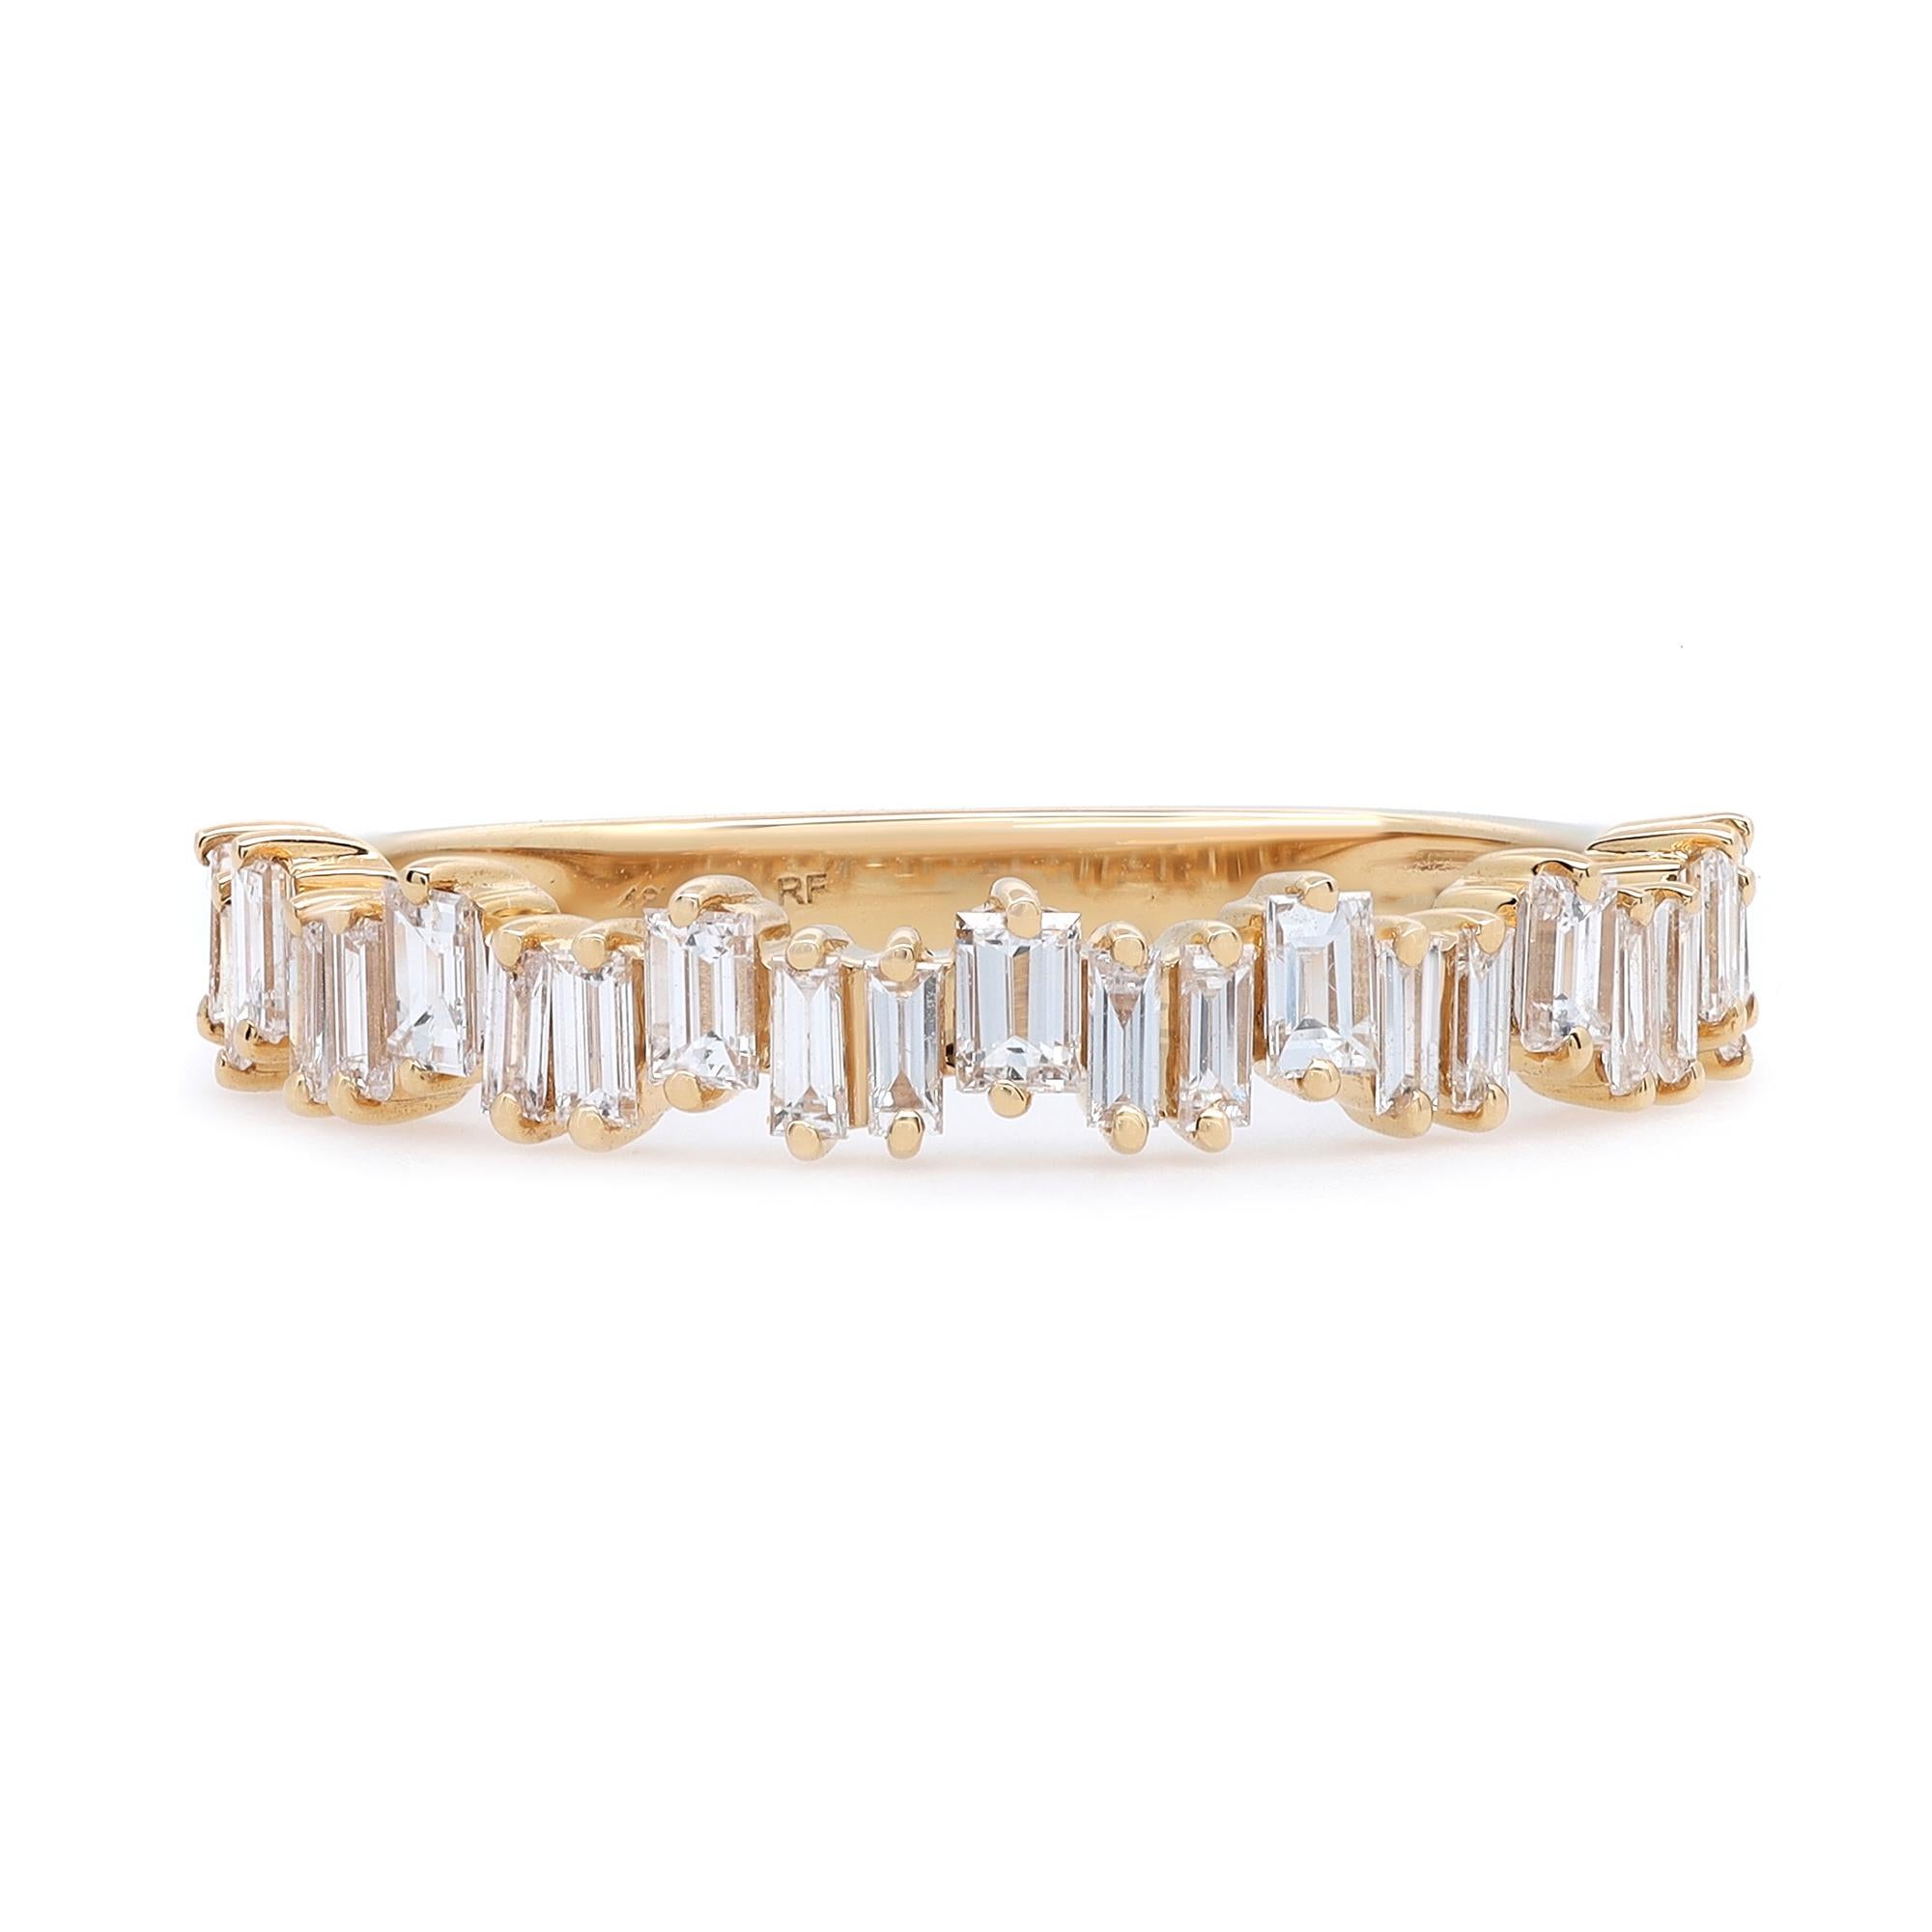 Simple and delicate diamond ring crafted in 18k yellow gold. This ring features prong set baguette cut diamonds set in a zig-zag pattern portraying a timeless, eye-catching style. It's stackable and easy to mix and match. Diamond carat weight: 0.64.